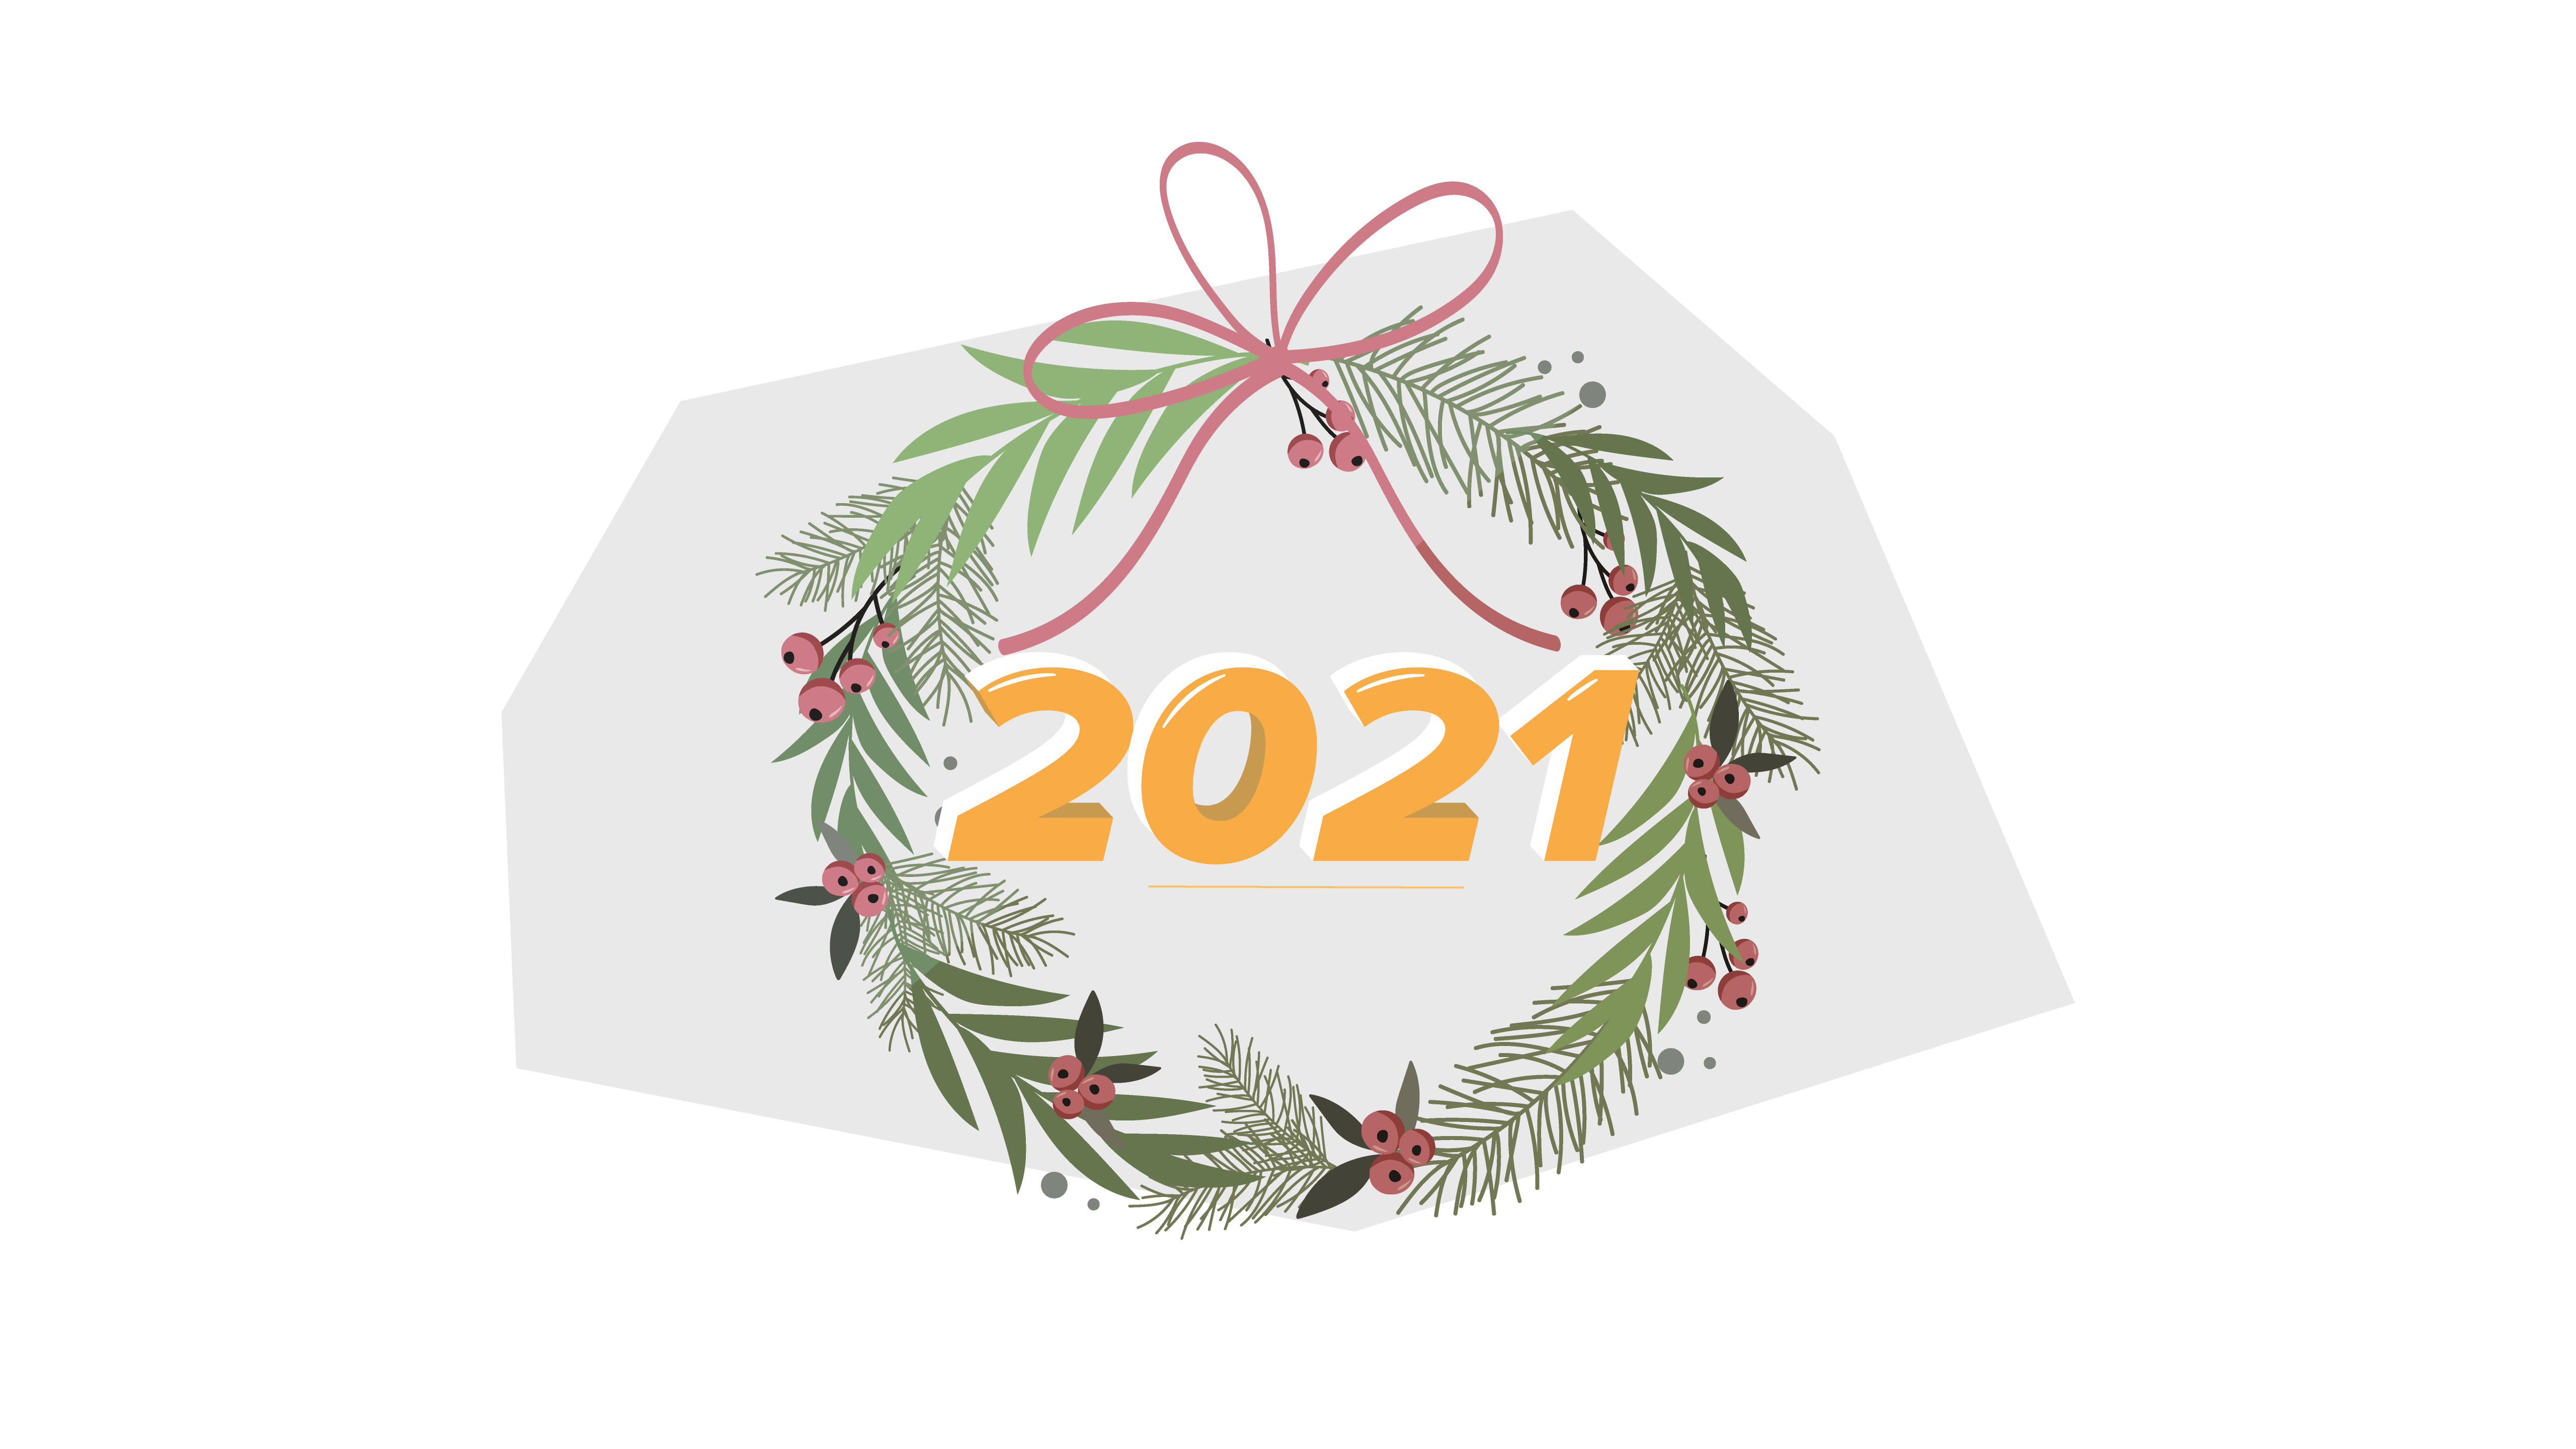 the numbers "2021" surrounded by a wreath